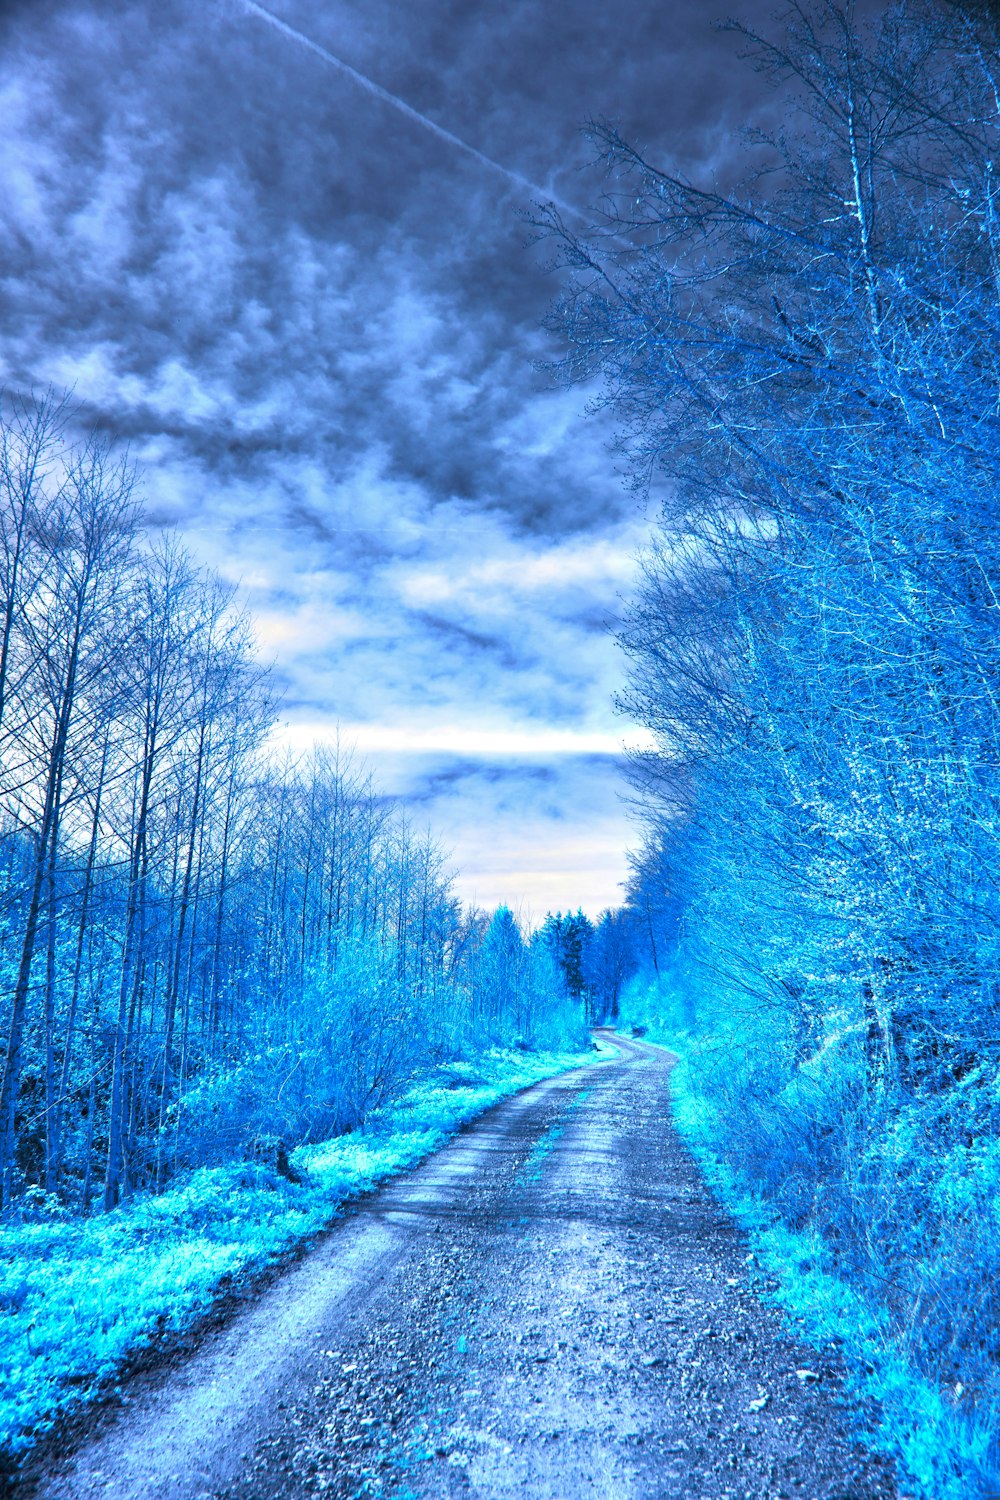 a dirt road surrounded by blue trees under a cloudy sky